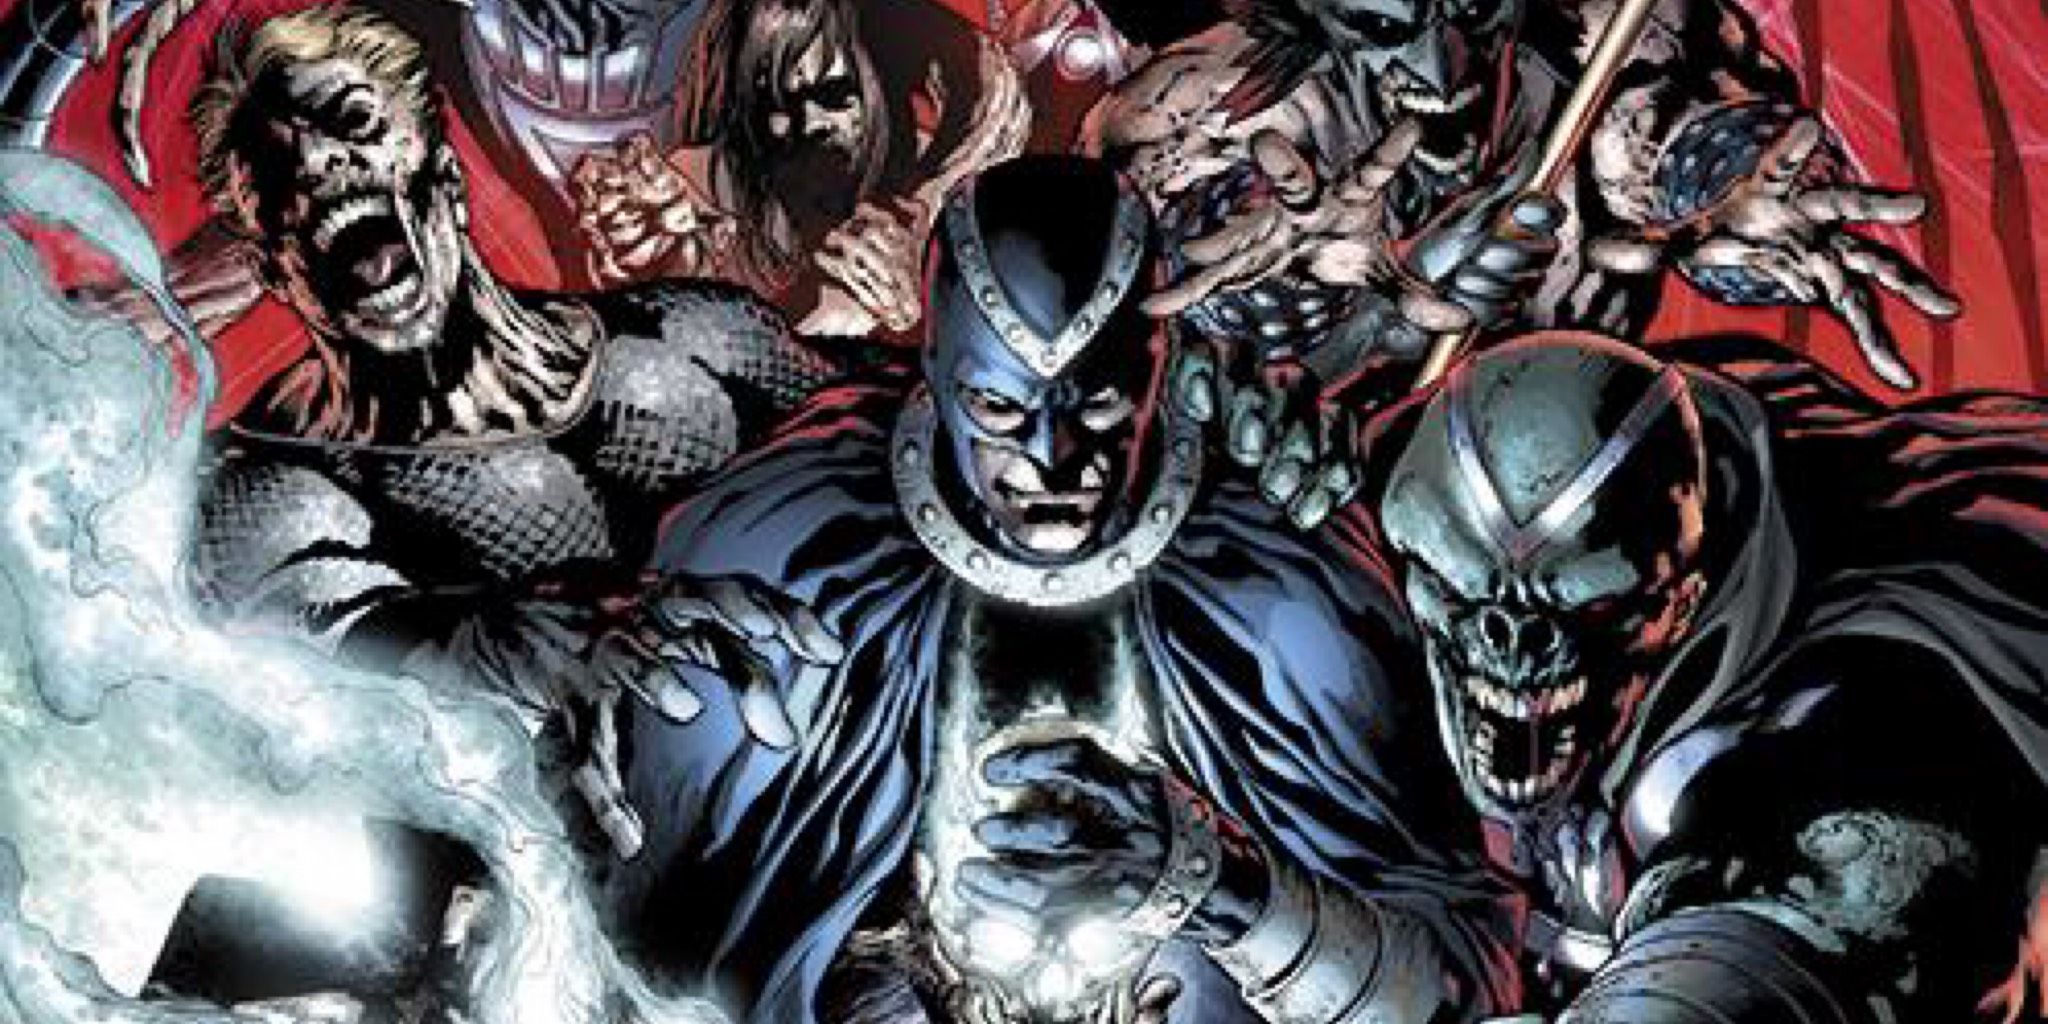 An image of the Black Lantern Corps gathering around one of their members in DC Comics